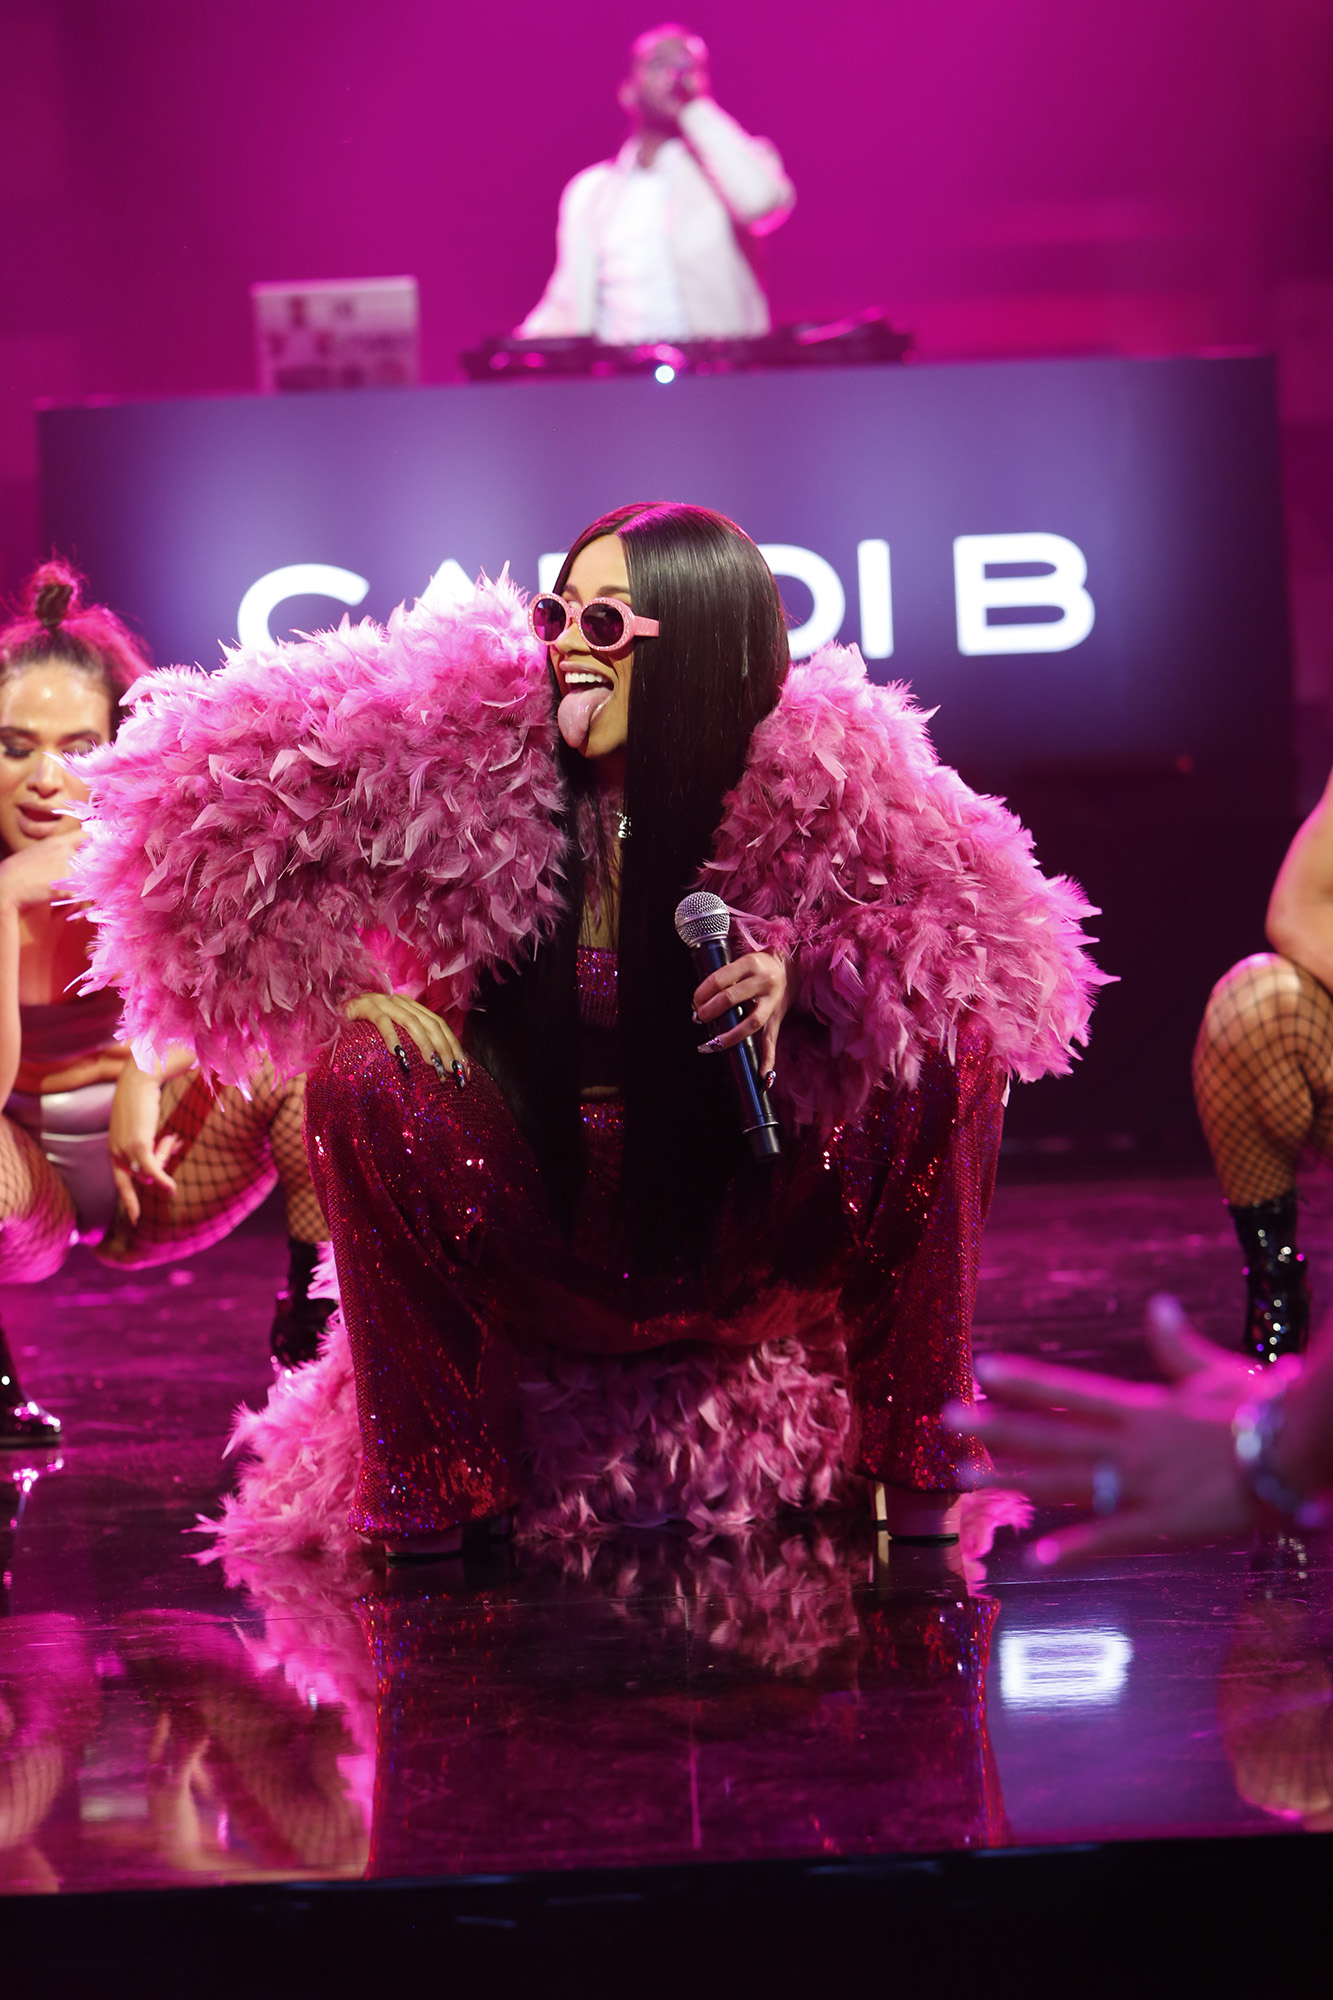 In Case You Missed It: Cardi B Performs Bodak Yellow On Jimmy Kimmel Live